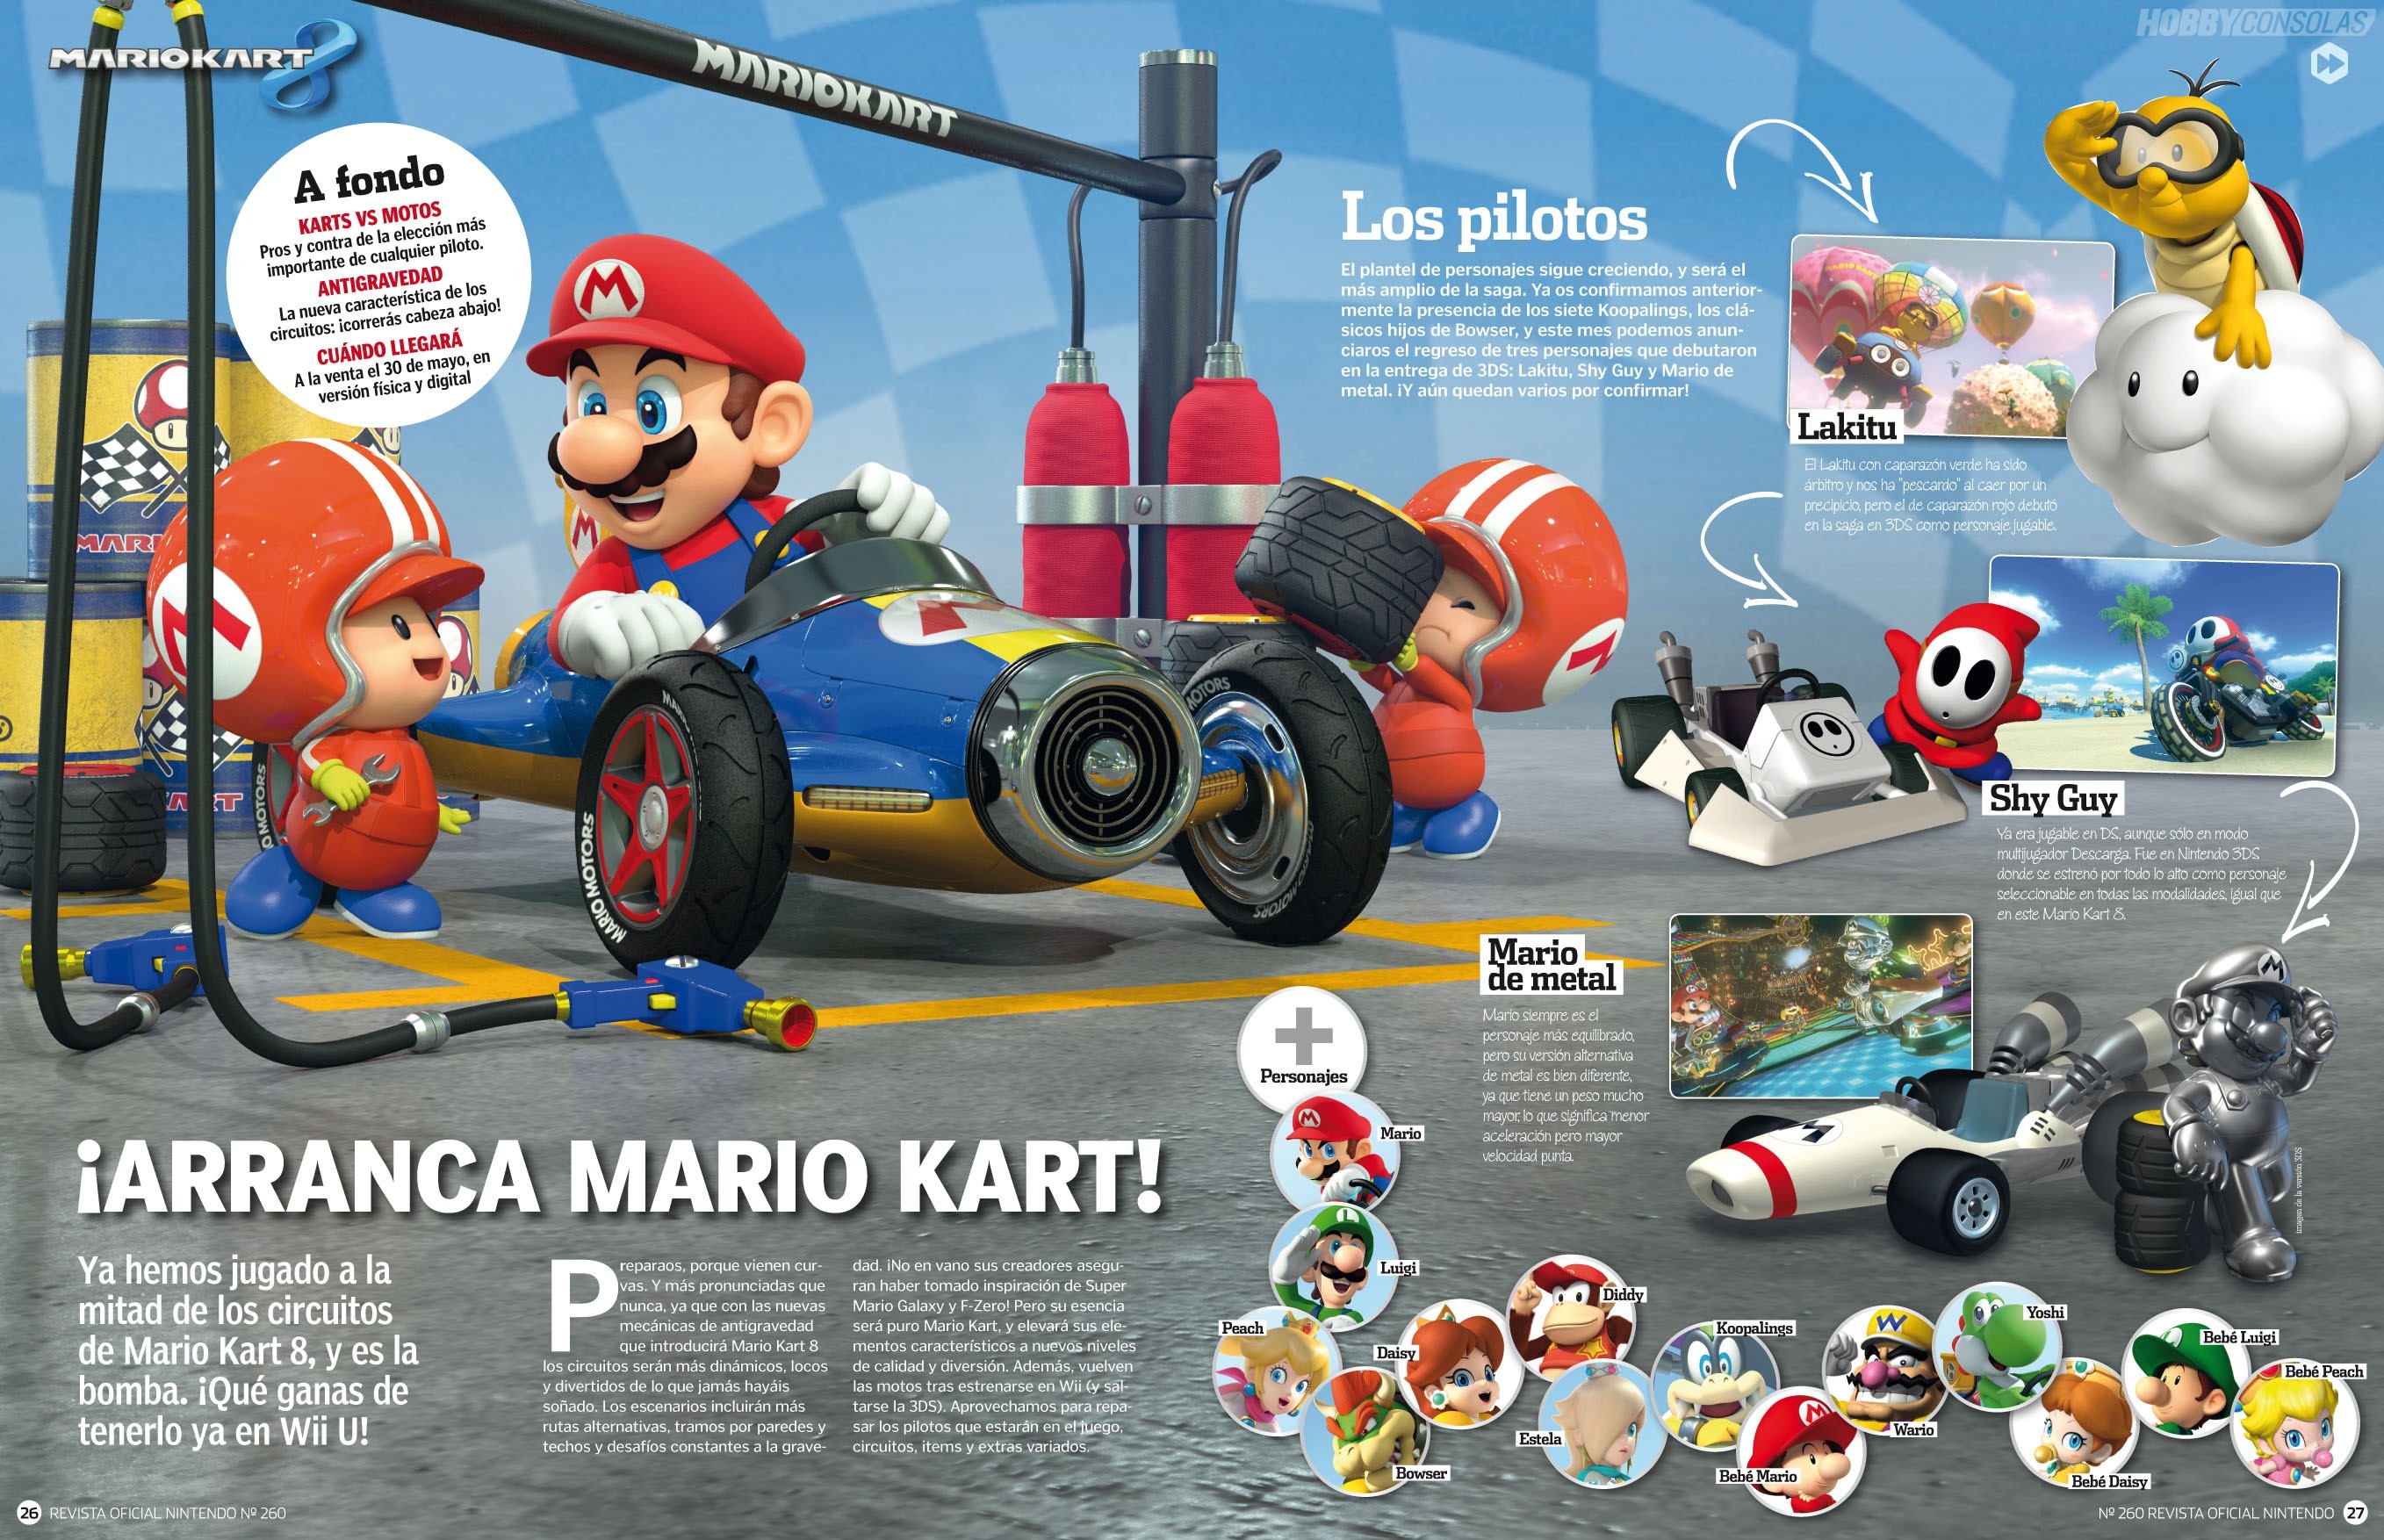 2715x1754 in Preview The Sky is the Limit for Mario Kart USgamer 2715Ã1754